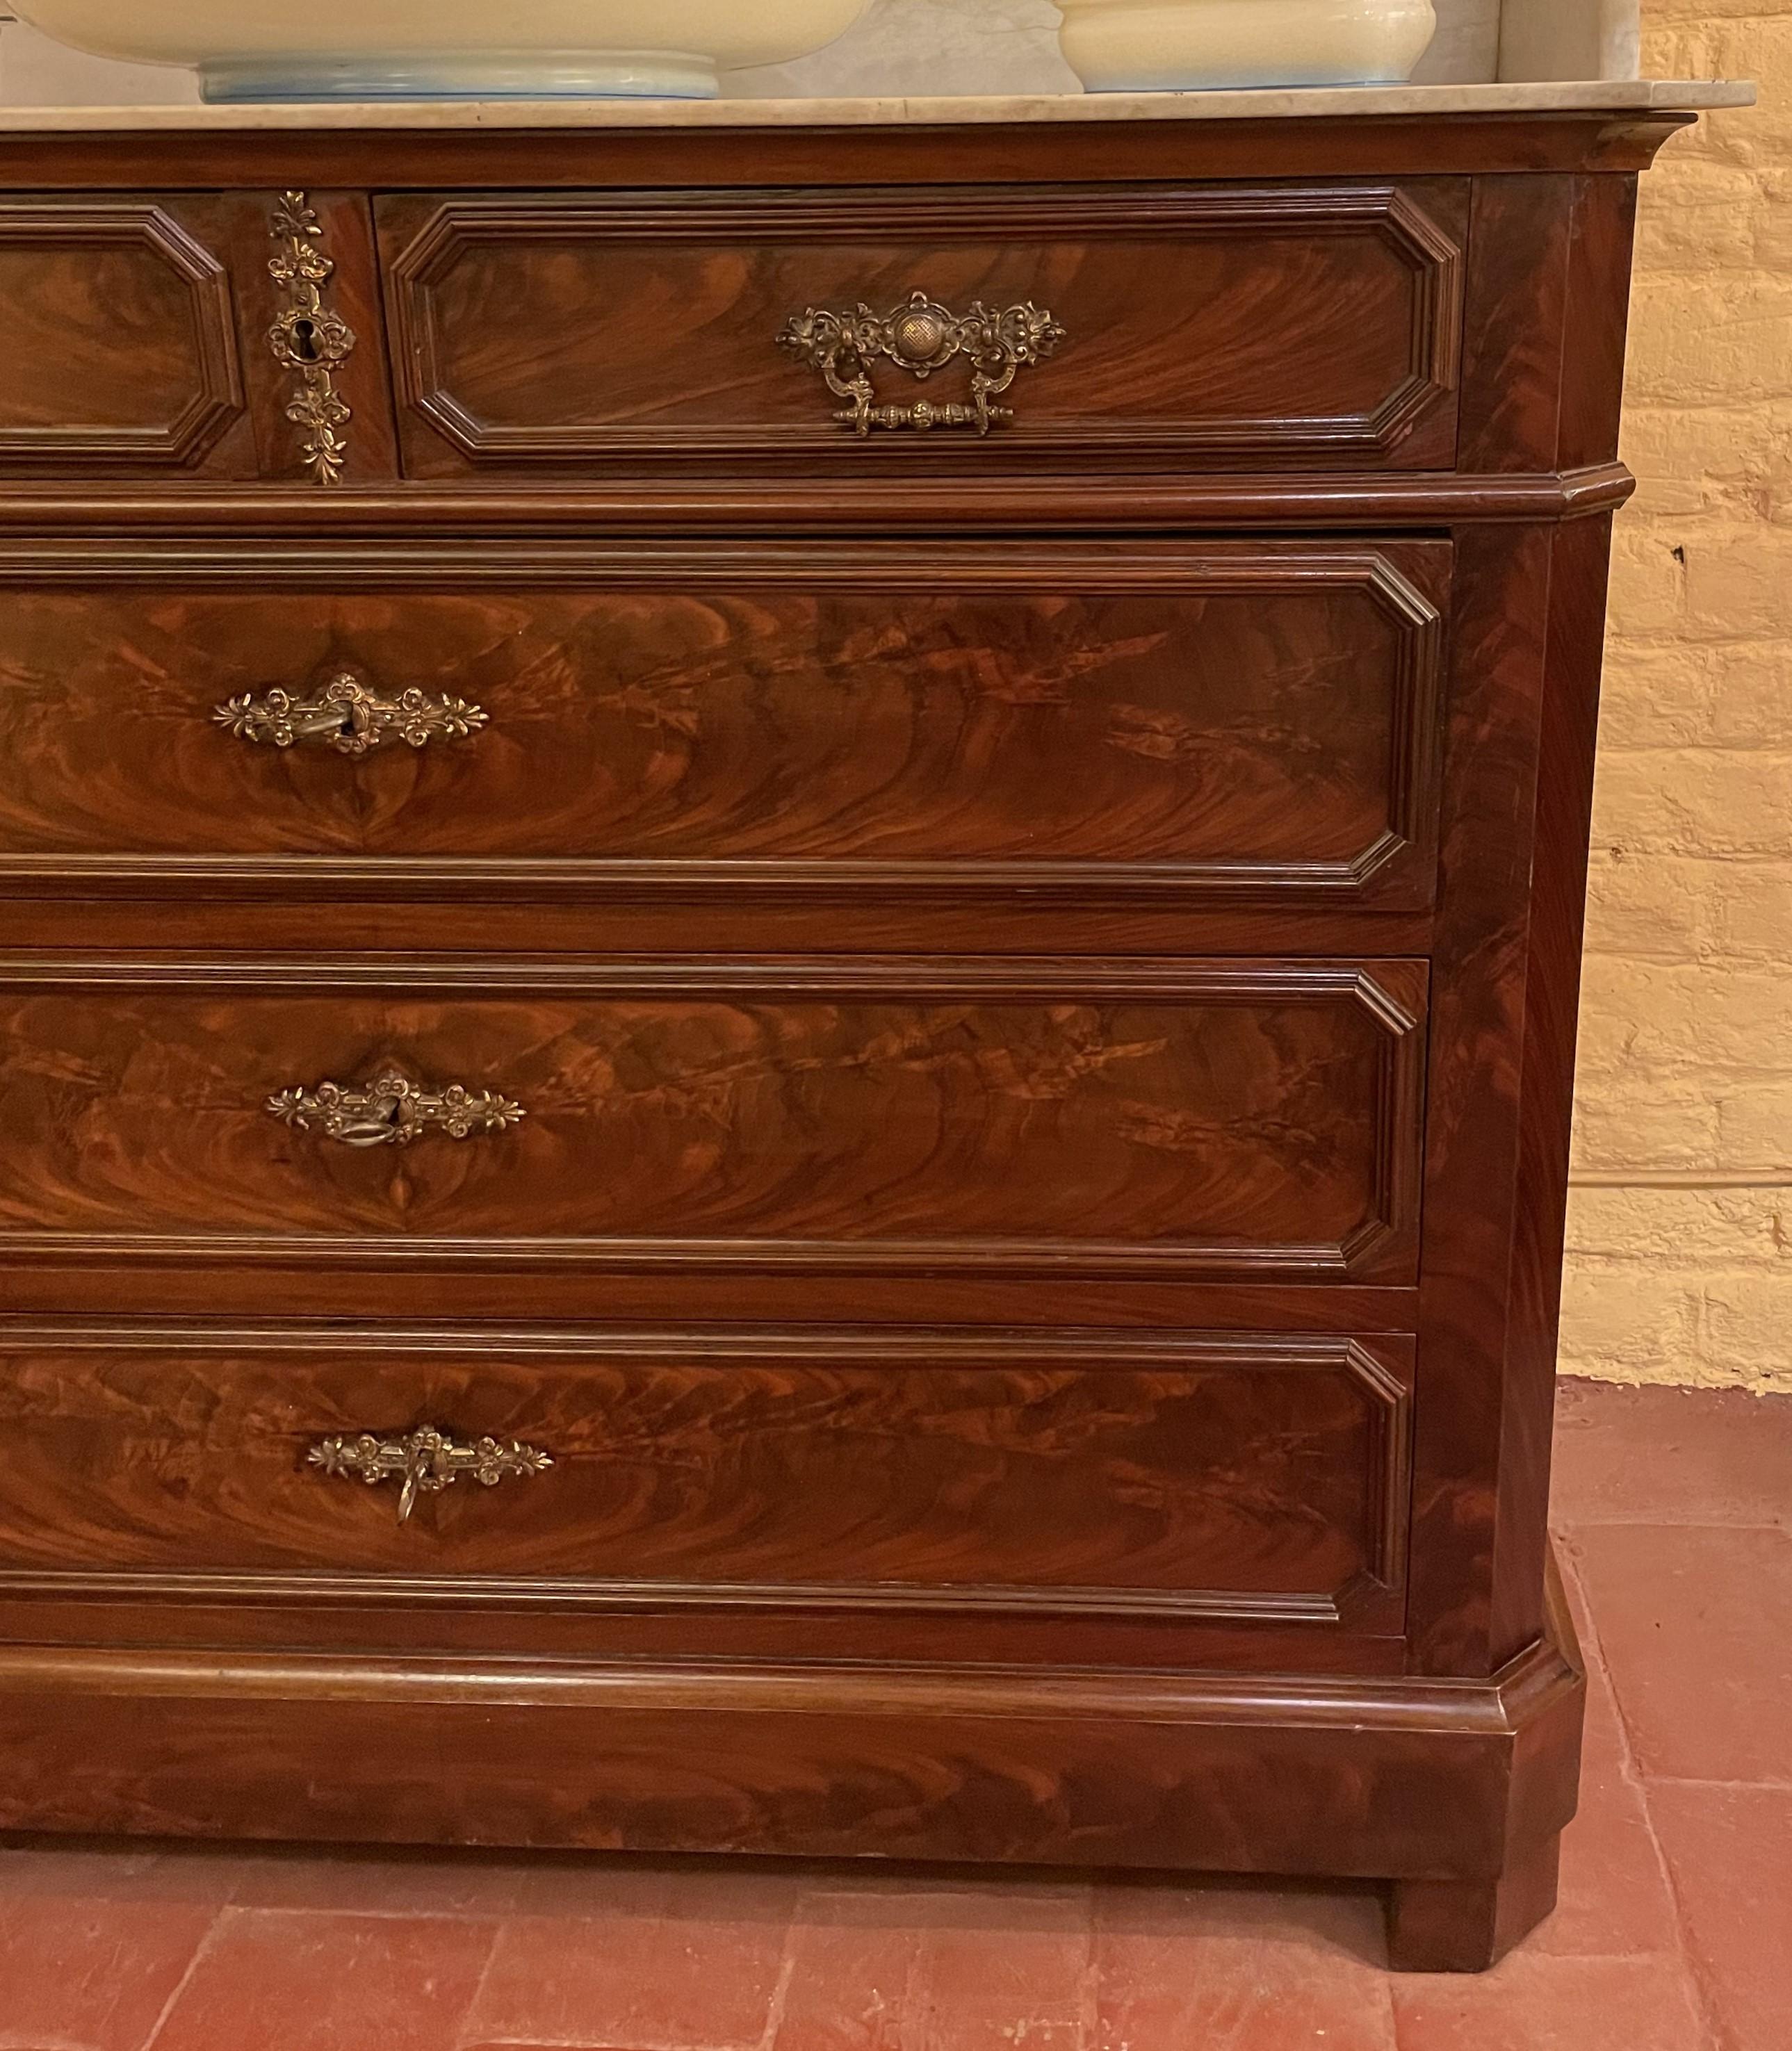 lovely 19th Century Mahogany Toilet/ lavaboCabinet

Very beautiful model in mahogany topped with white marble
The lower part is made up of 5 drawers. The three bottom drawers have their working keys. Original handles
Very beautiful flame on the